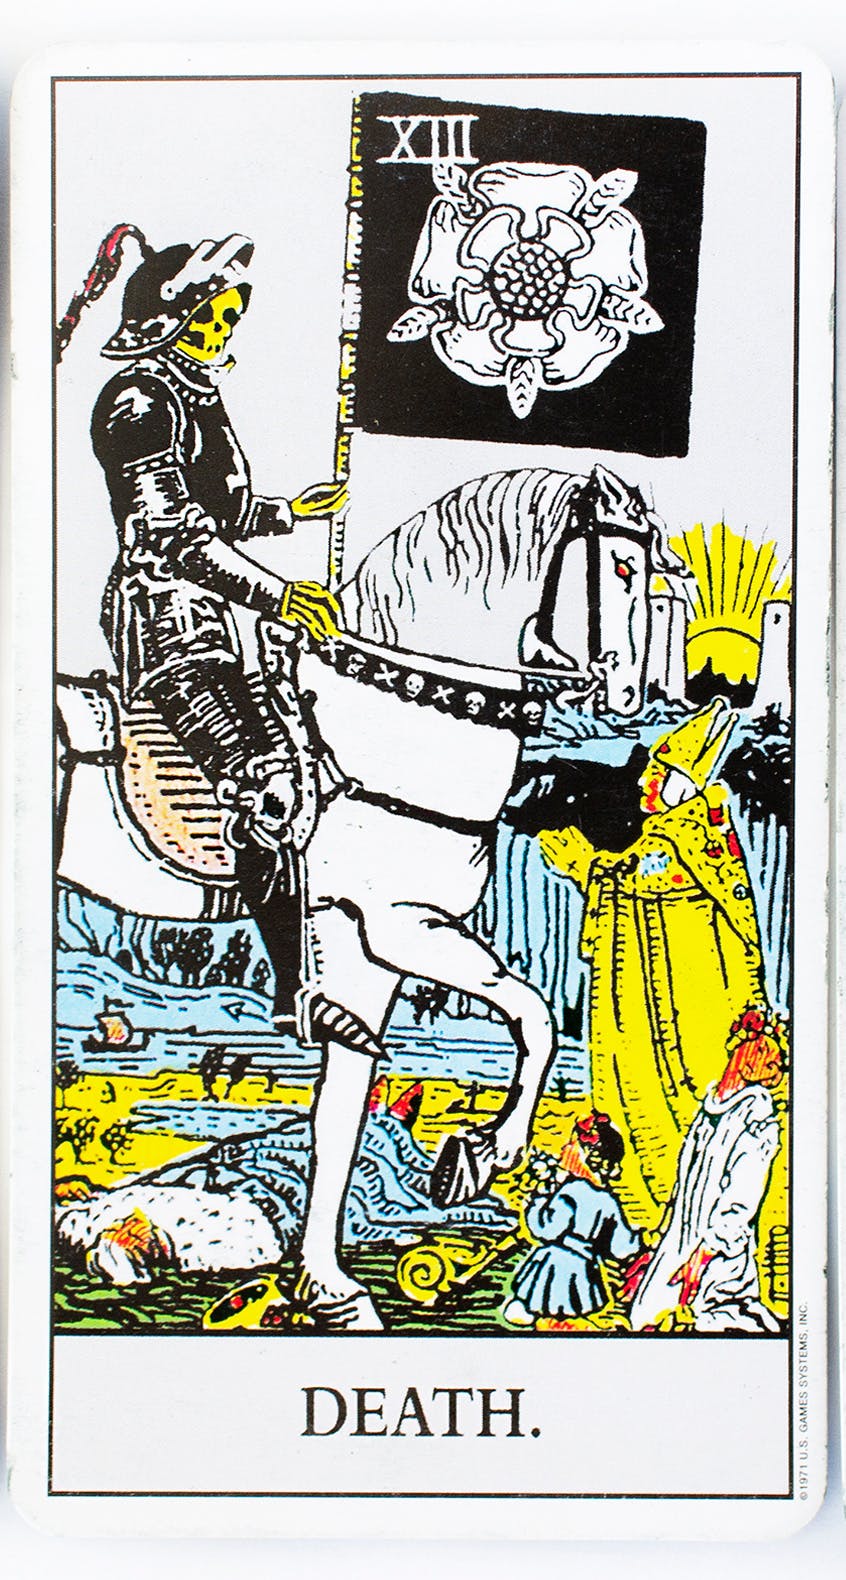 teh death tarot card from the rider-waite deck. image of a skeleton riding a horse while holding a sickle and common people being crushed underneath.